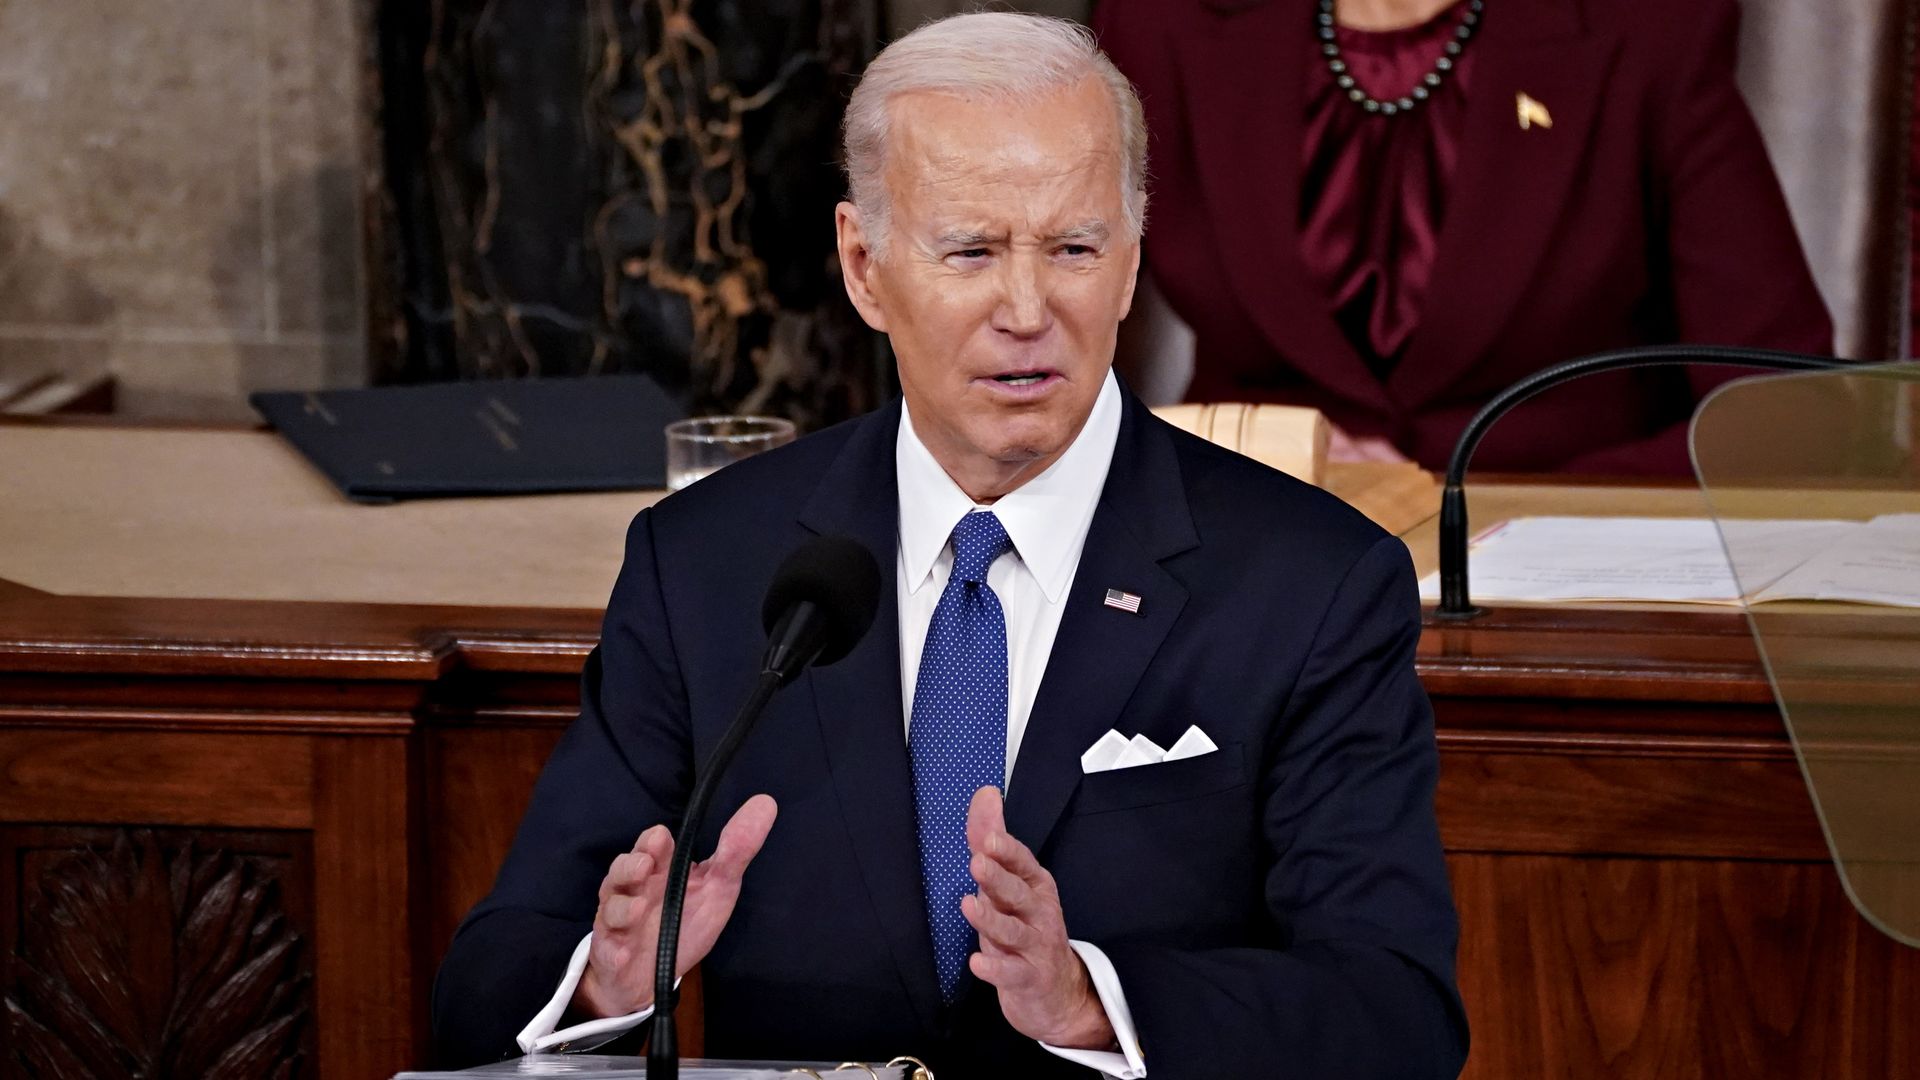 President Biden speaks during his State of the Union address on Tuedsay.